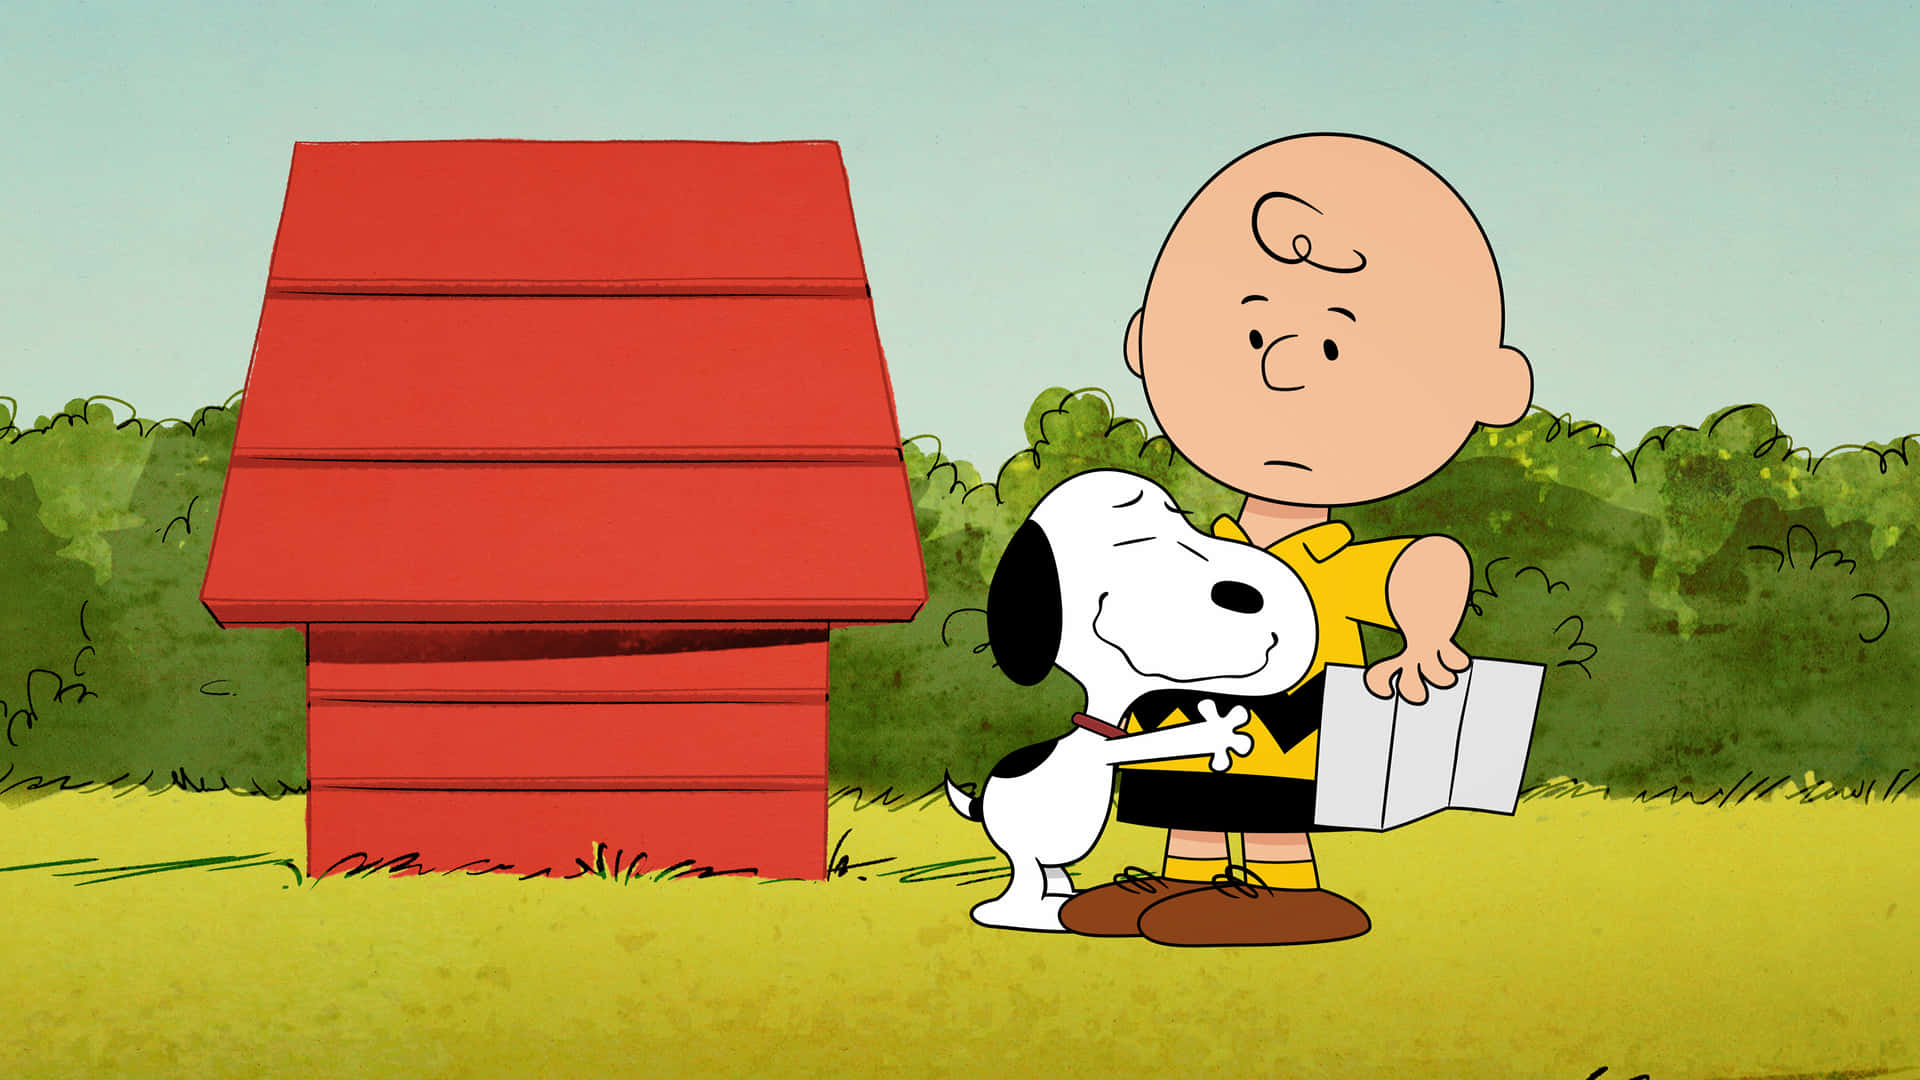 Snoopy - The beloved Peanuts Character